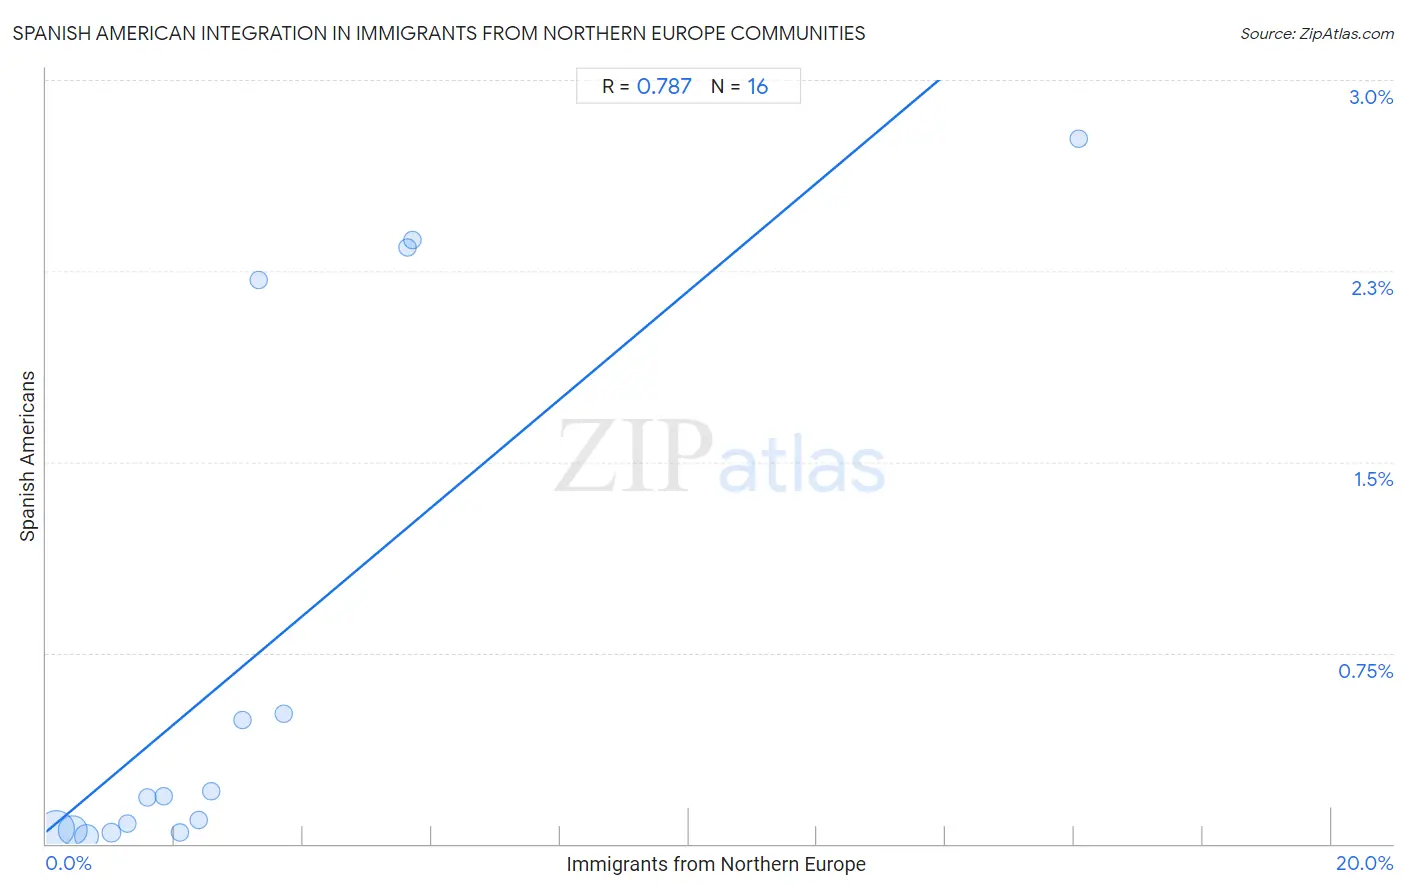 Immigrants from Northern Europe Integration in Spanish American Communities